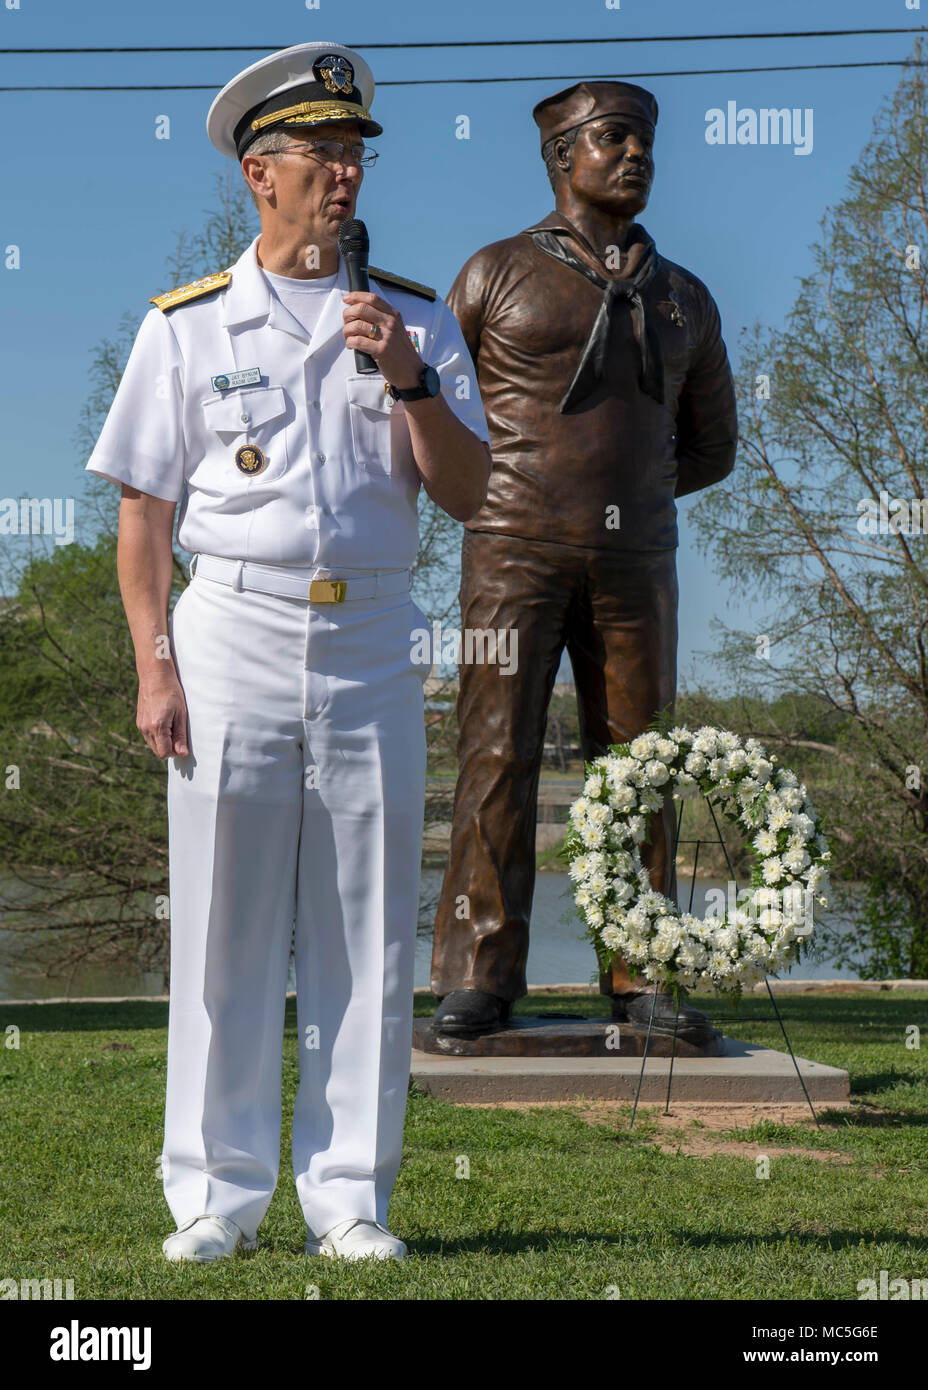 180404-N-YR245-0055 WACO, Texas (April 4, 2018) Rear Adm. Jay Bynum, Chief of Naval Air Training and Waco native, speaks at a ceremony honoring Doris “Dorie” Miller on the Waco Riverwalk during Waco Navy Week. The Navy Office of Community Outreach uses the Navy Week program to bring Navy Sailors, equipment and displays to approximately 15 American cities each year for a week-long schedule of outreach engagements. (U.S Navy photo by Mass Communication Specialist 2nd Class Craig Z. Rodarte/Released) Stock Photo